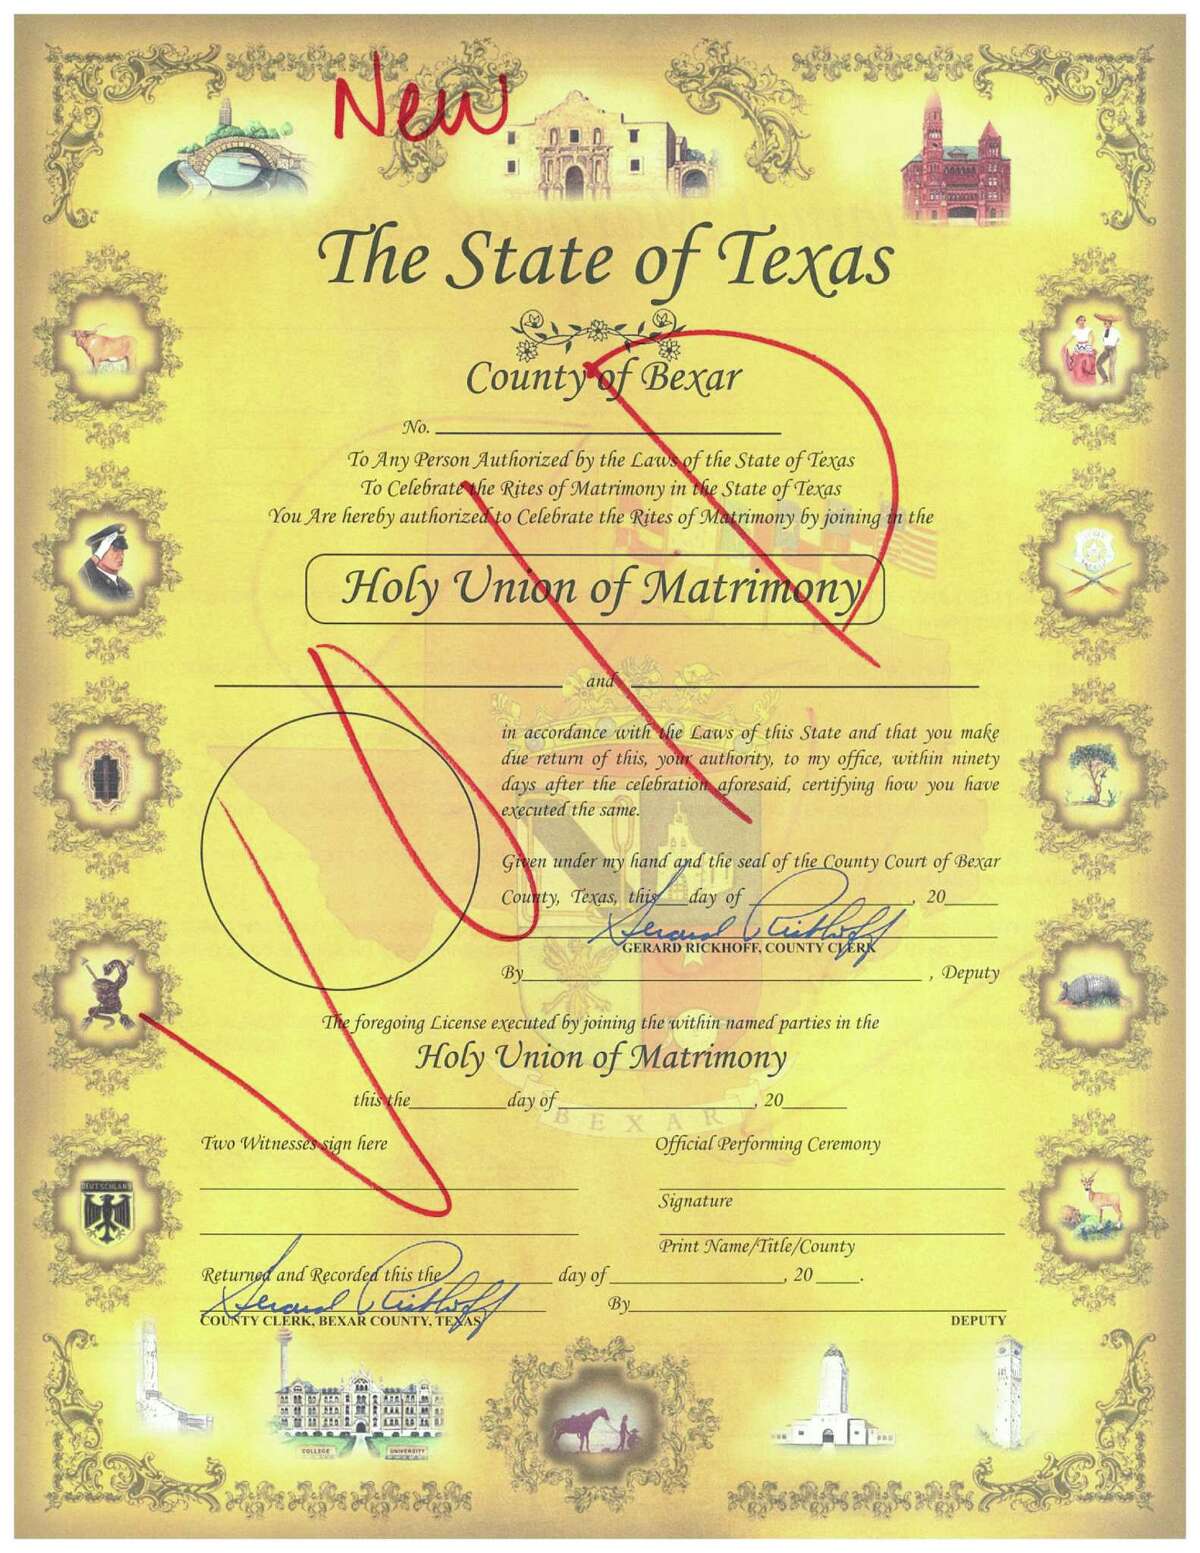 Pictured, a revised marriage license to be issued by the Bexar County Clerk's Office. The new license removes gender references in anticipation of a ruling from the U.S. Supreme Court legalizing same-sex marriage in all 50 states.